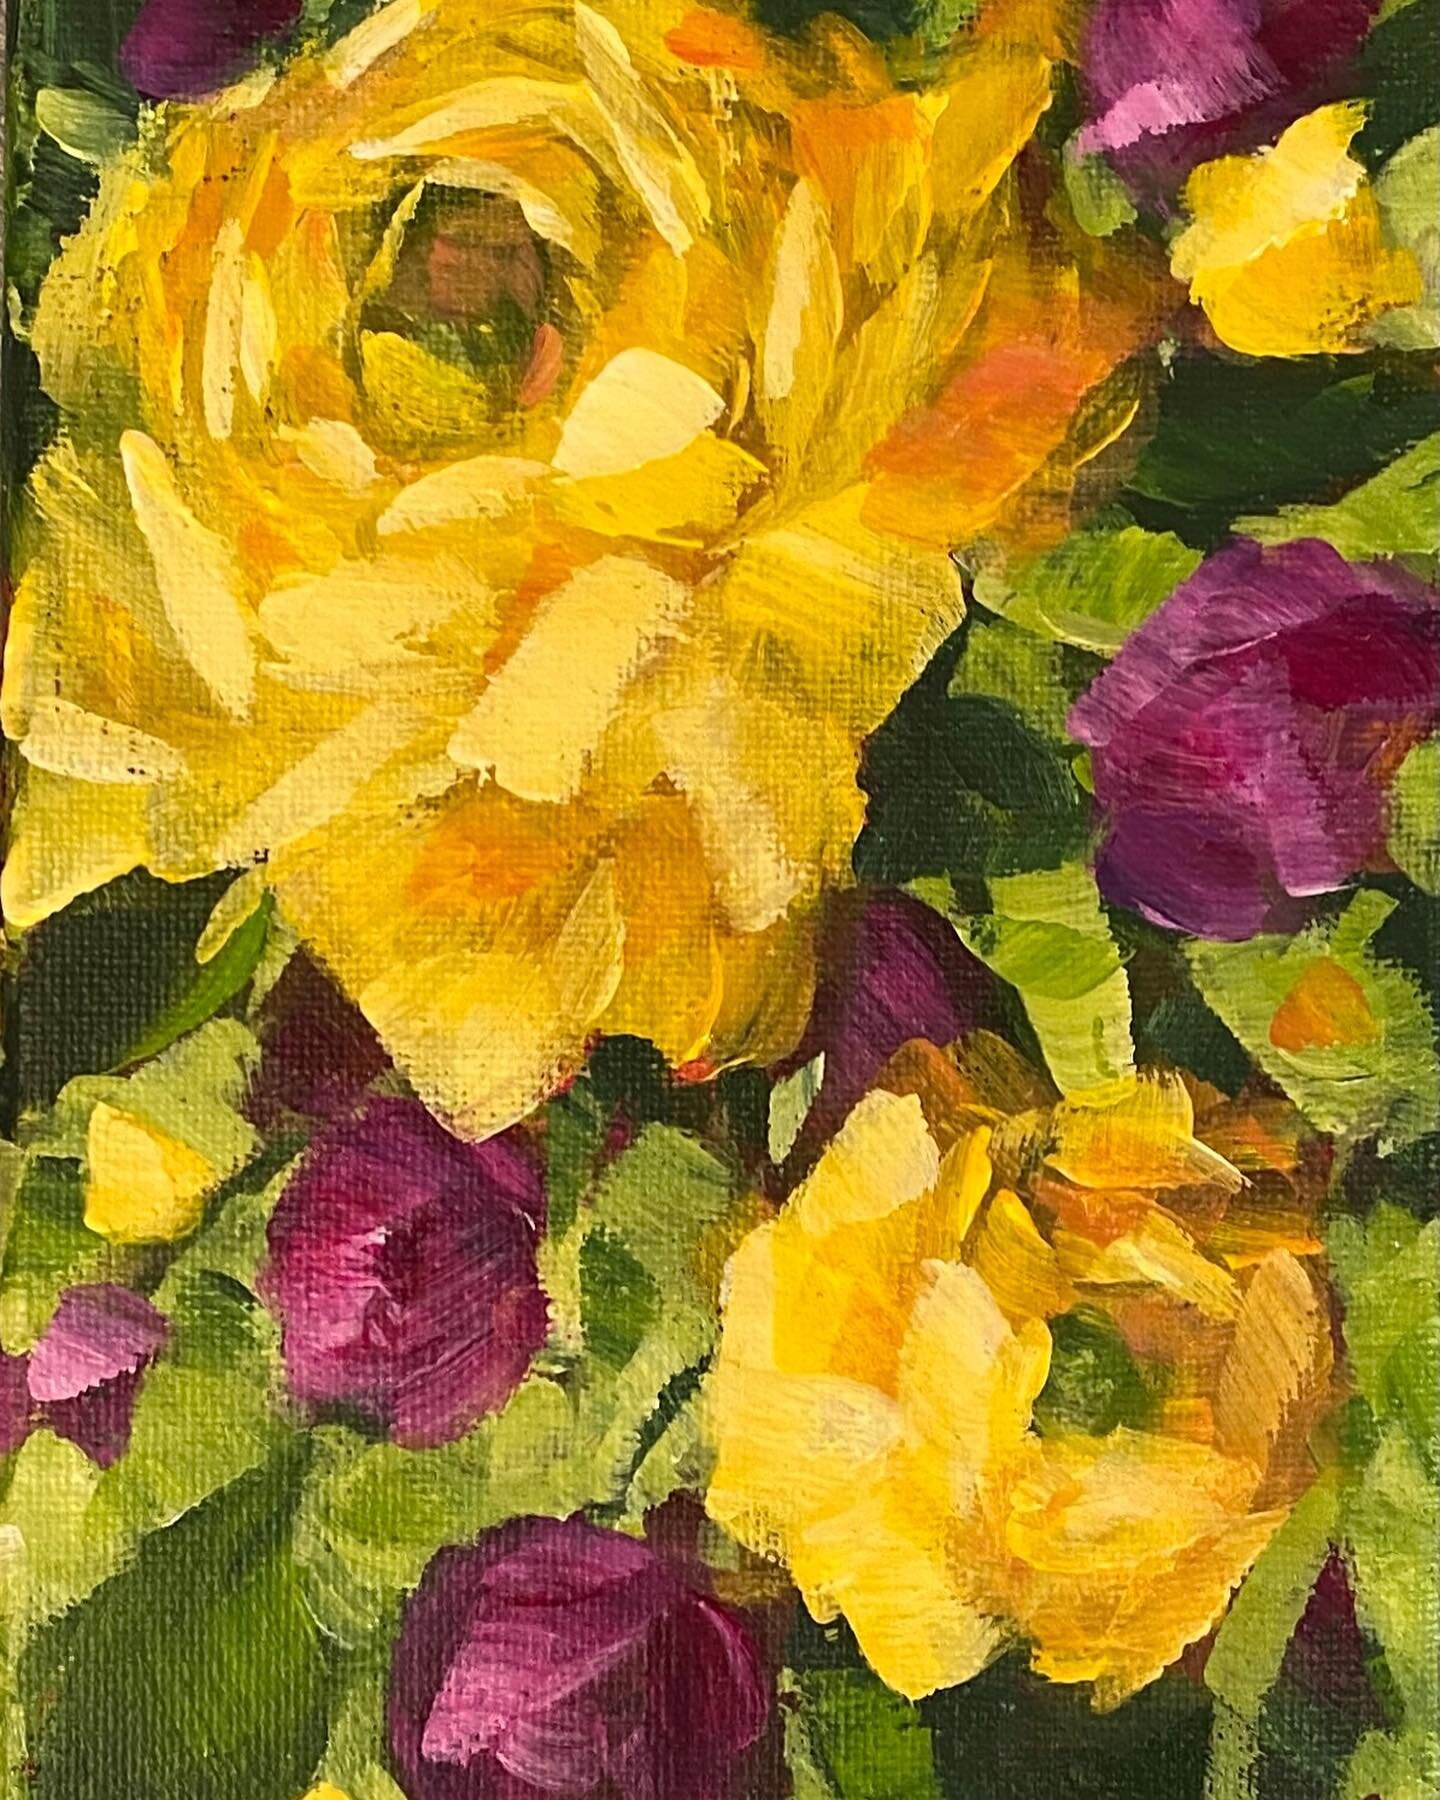 A ray of sunshine to brighten your day today!  I should use yellows more often&hellip;such a cheerful colour! &ldquo;Sunshine Roses&rdquo;, 5x7&rdquo;, framed will be listed in my Etsy shop soon! 😊🌸

#yellowrosesaremyfavorite #yellowroses💛🌹 #rosy